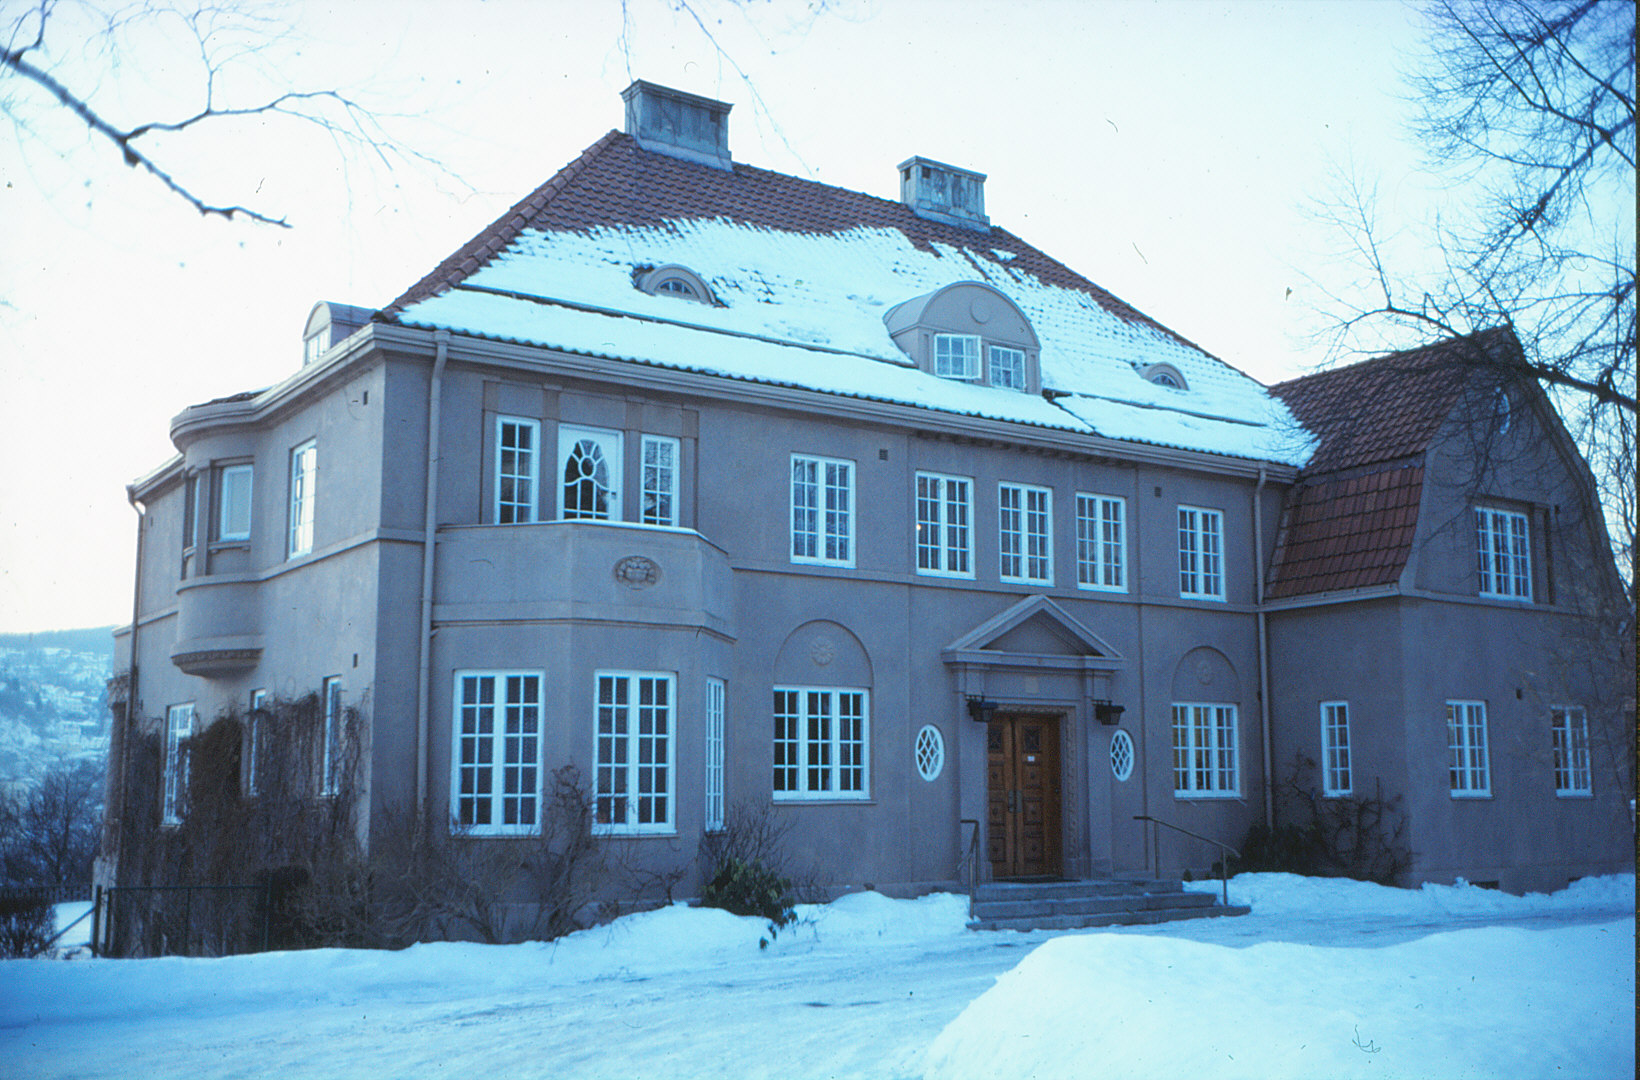 there is a large home with a snow covered roof